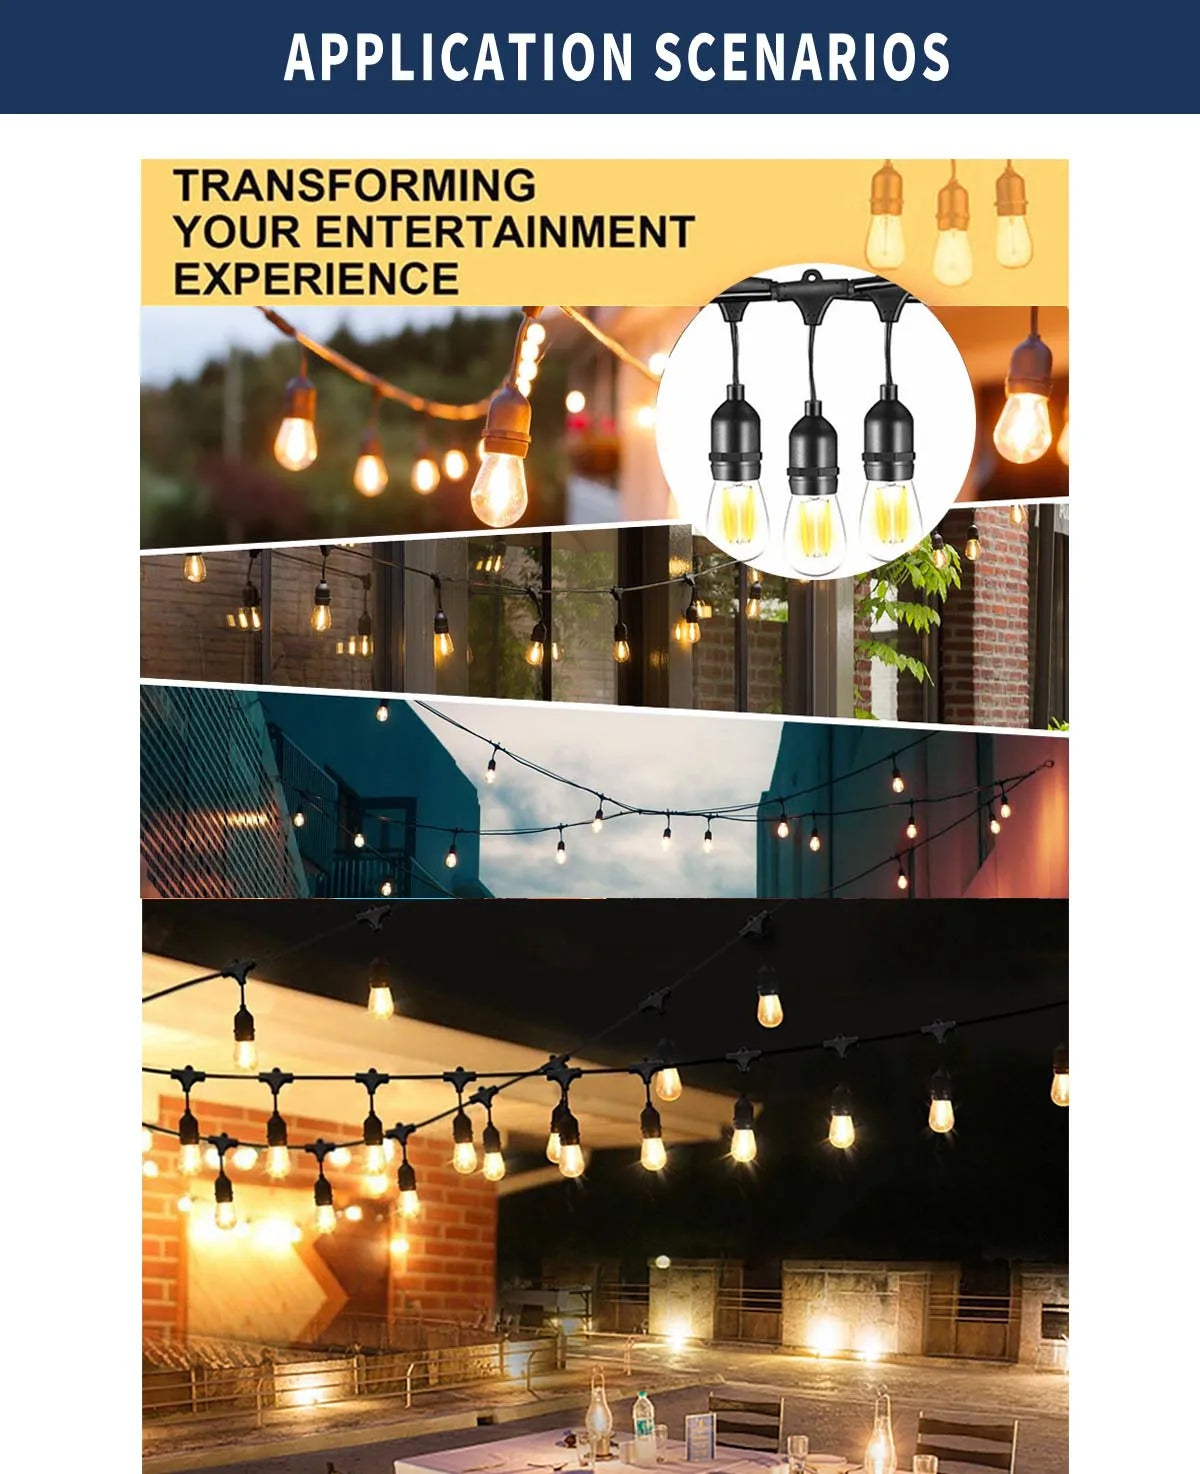 Waterproof LED string lights for outdoor use, perfect for festivals, holidays, and events.